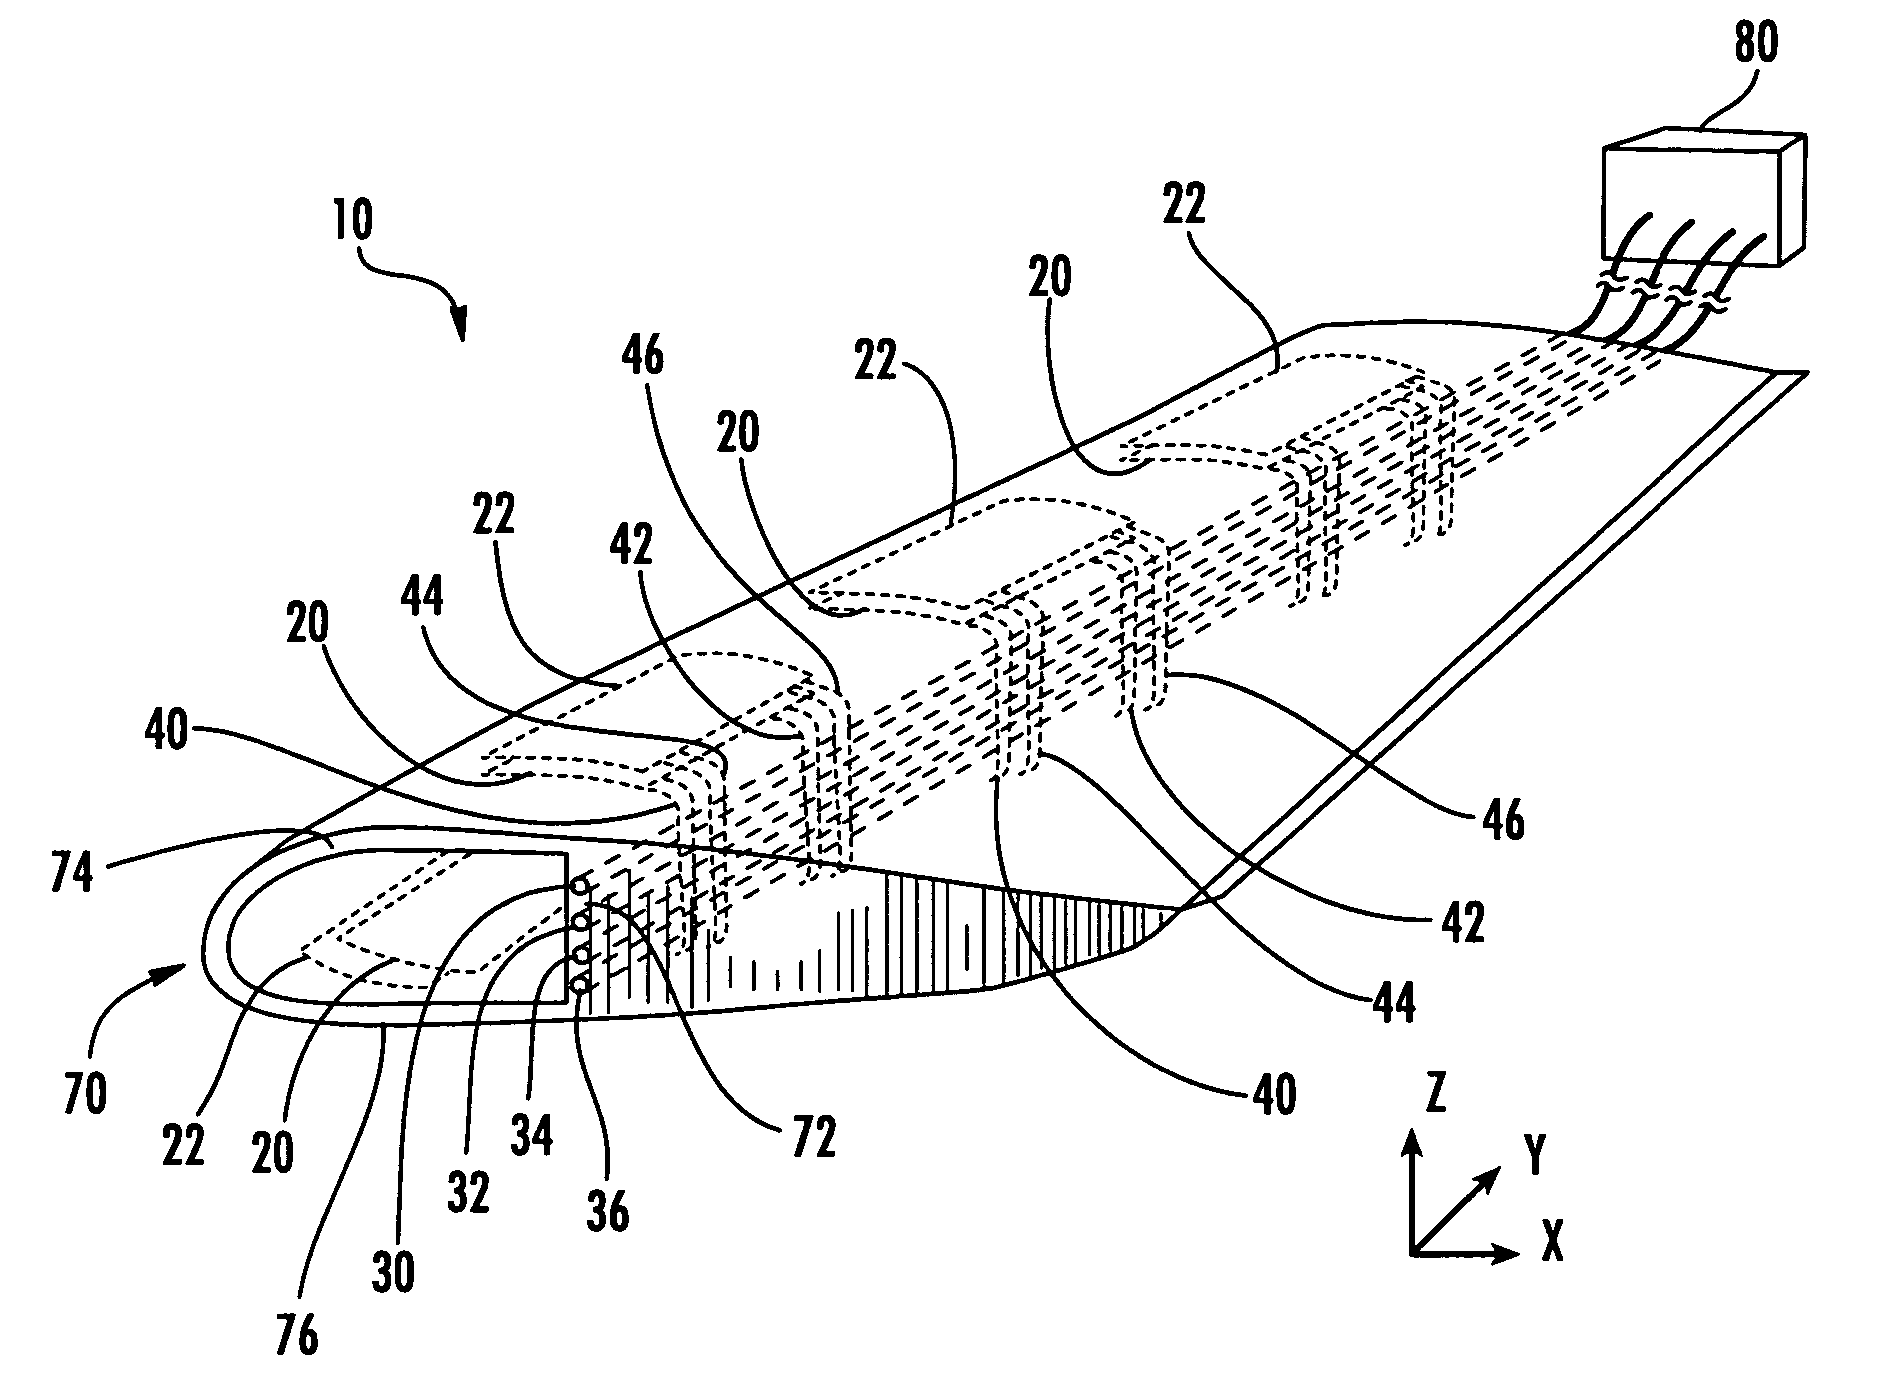 Method of manufacturing a composite structural member having an integrated electrical circuit